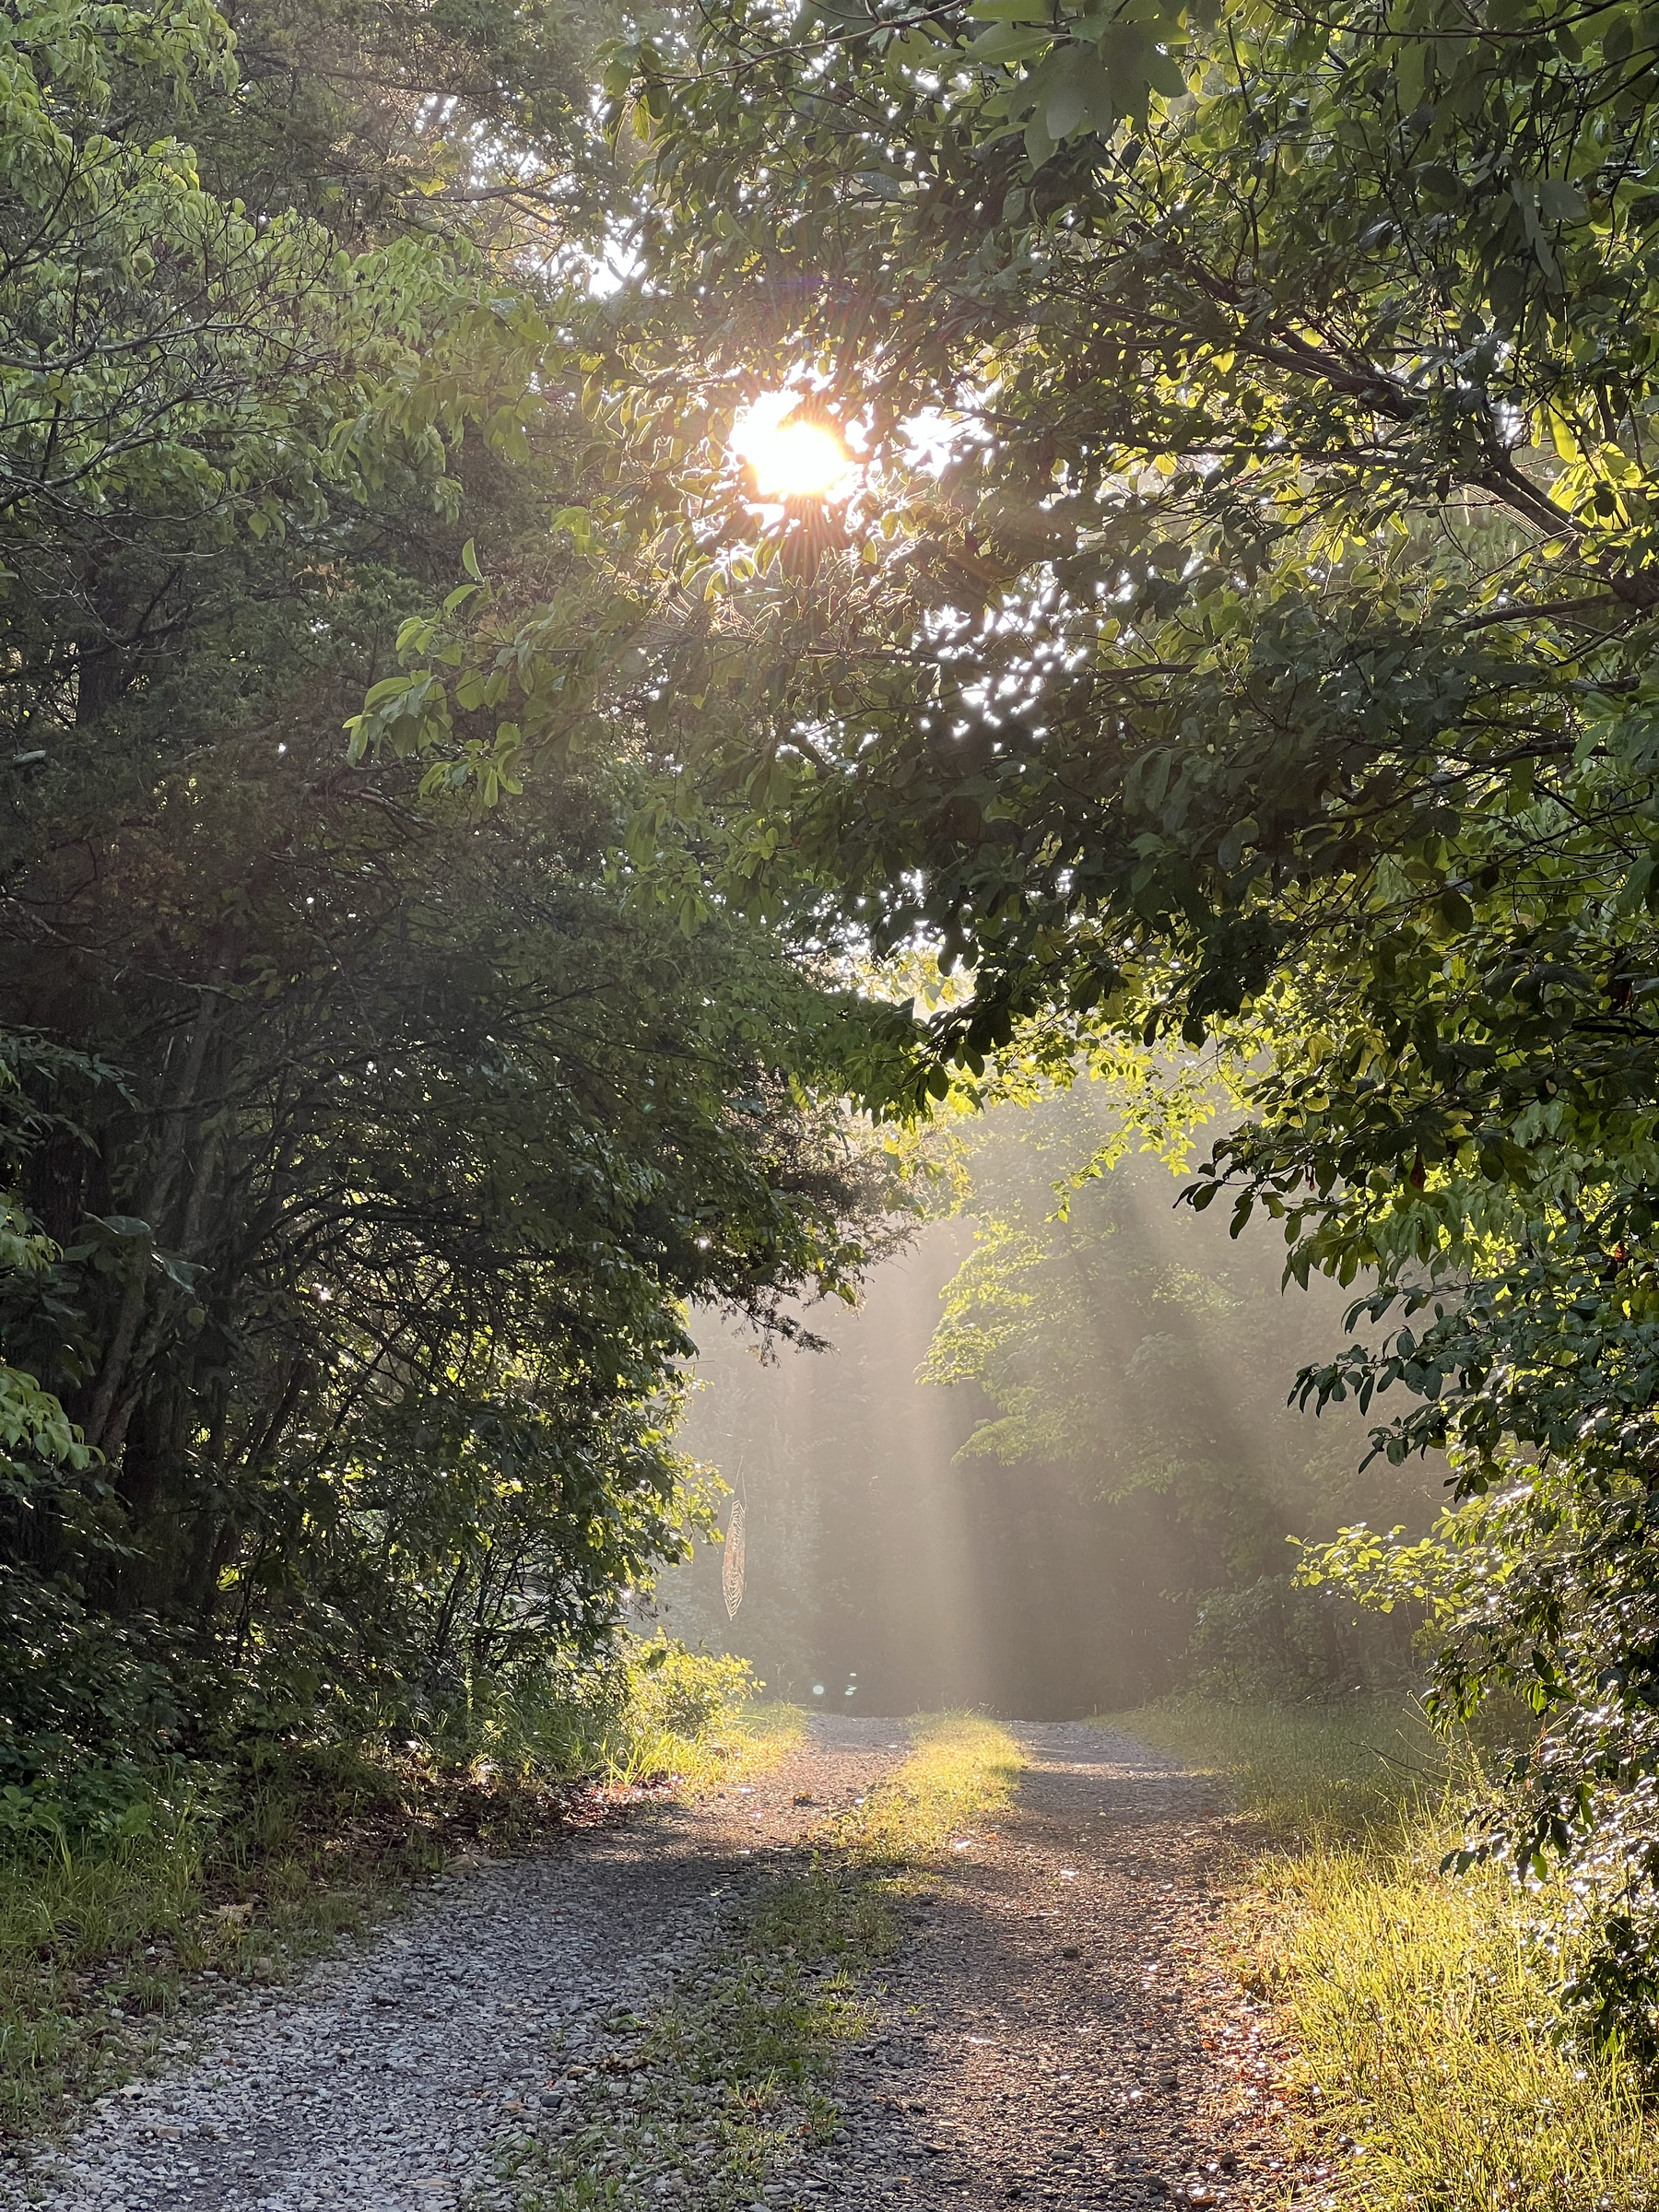 The sun shining behind several trees casting light rays onto a gravel road that is bordered with a mix of trees and grass